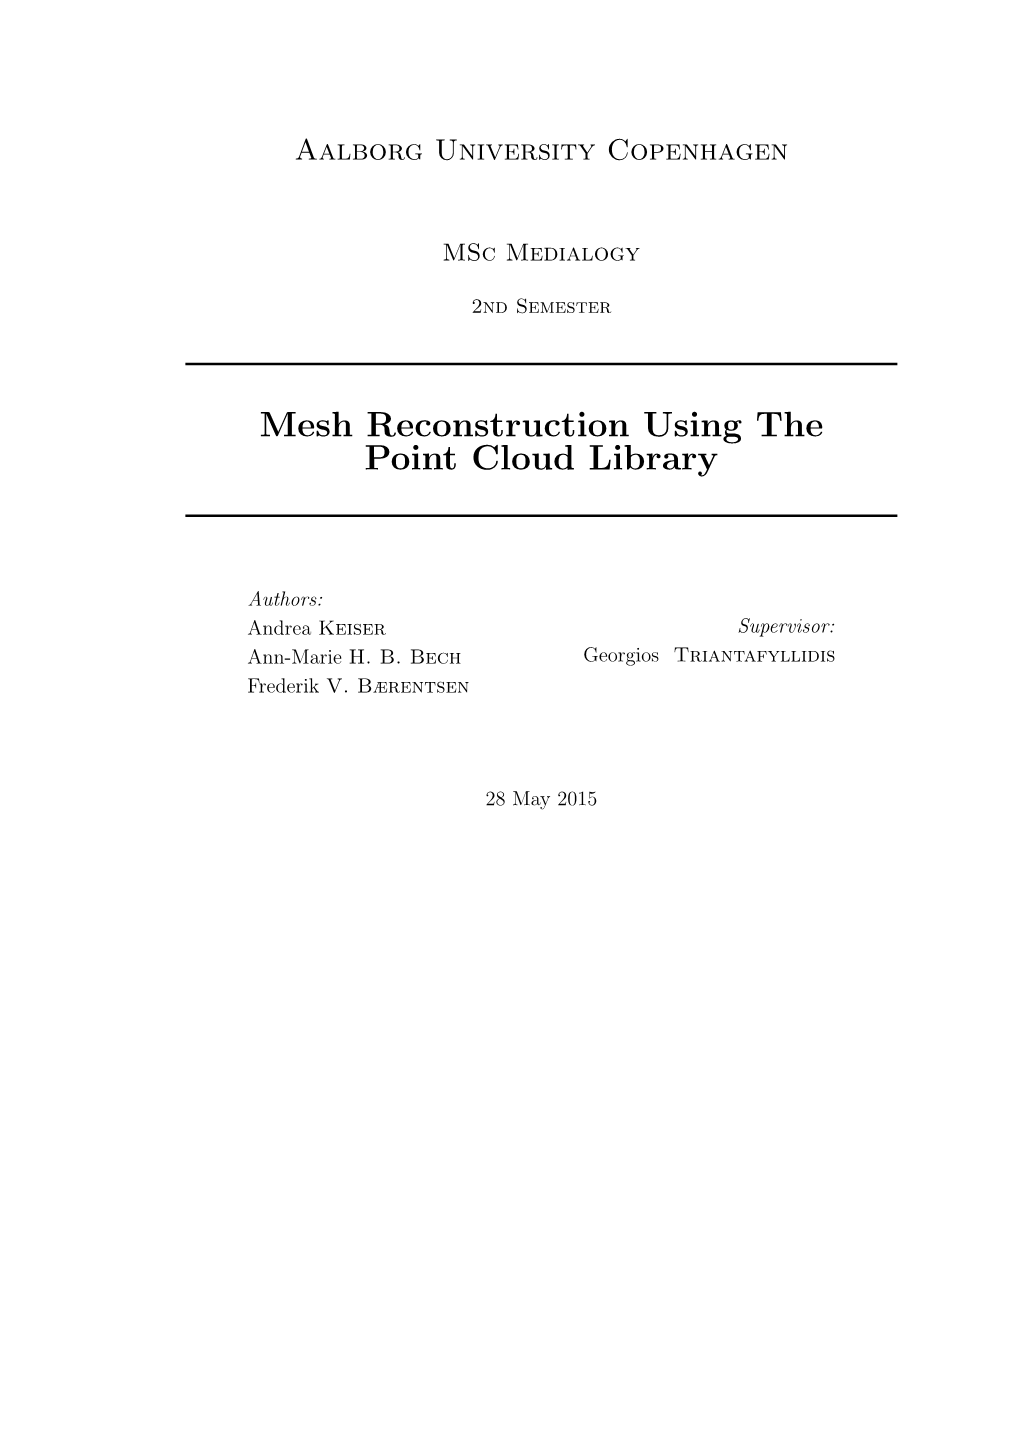 Mesh Reconstruction Using the Point Cloud Library